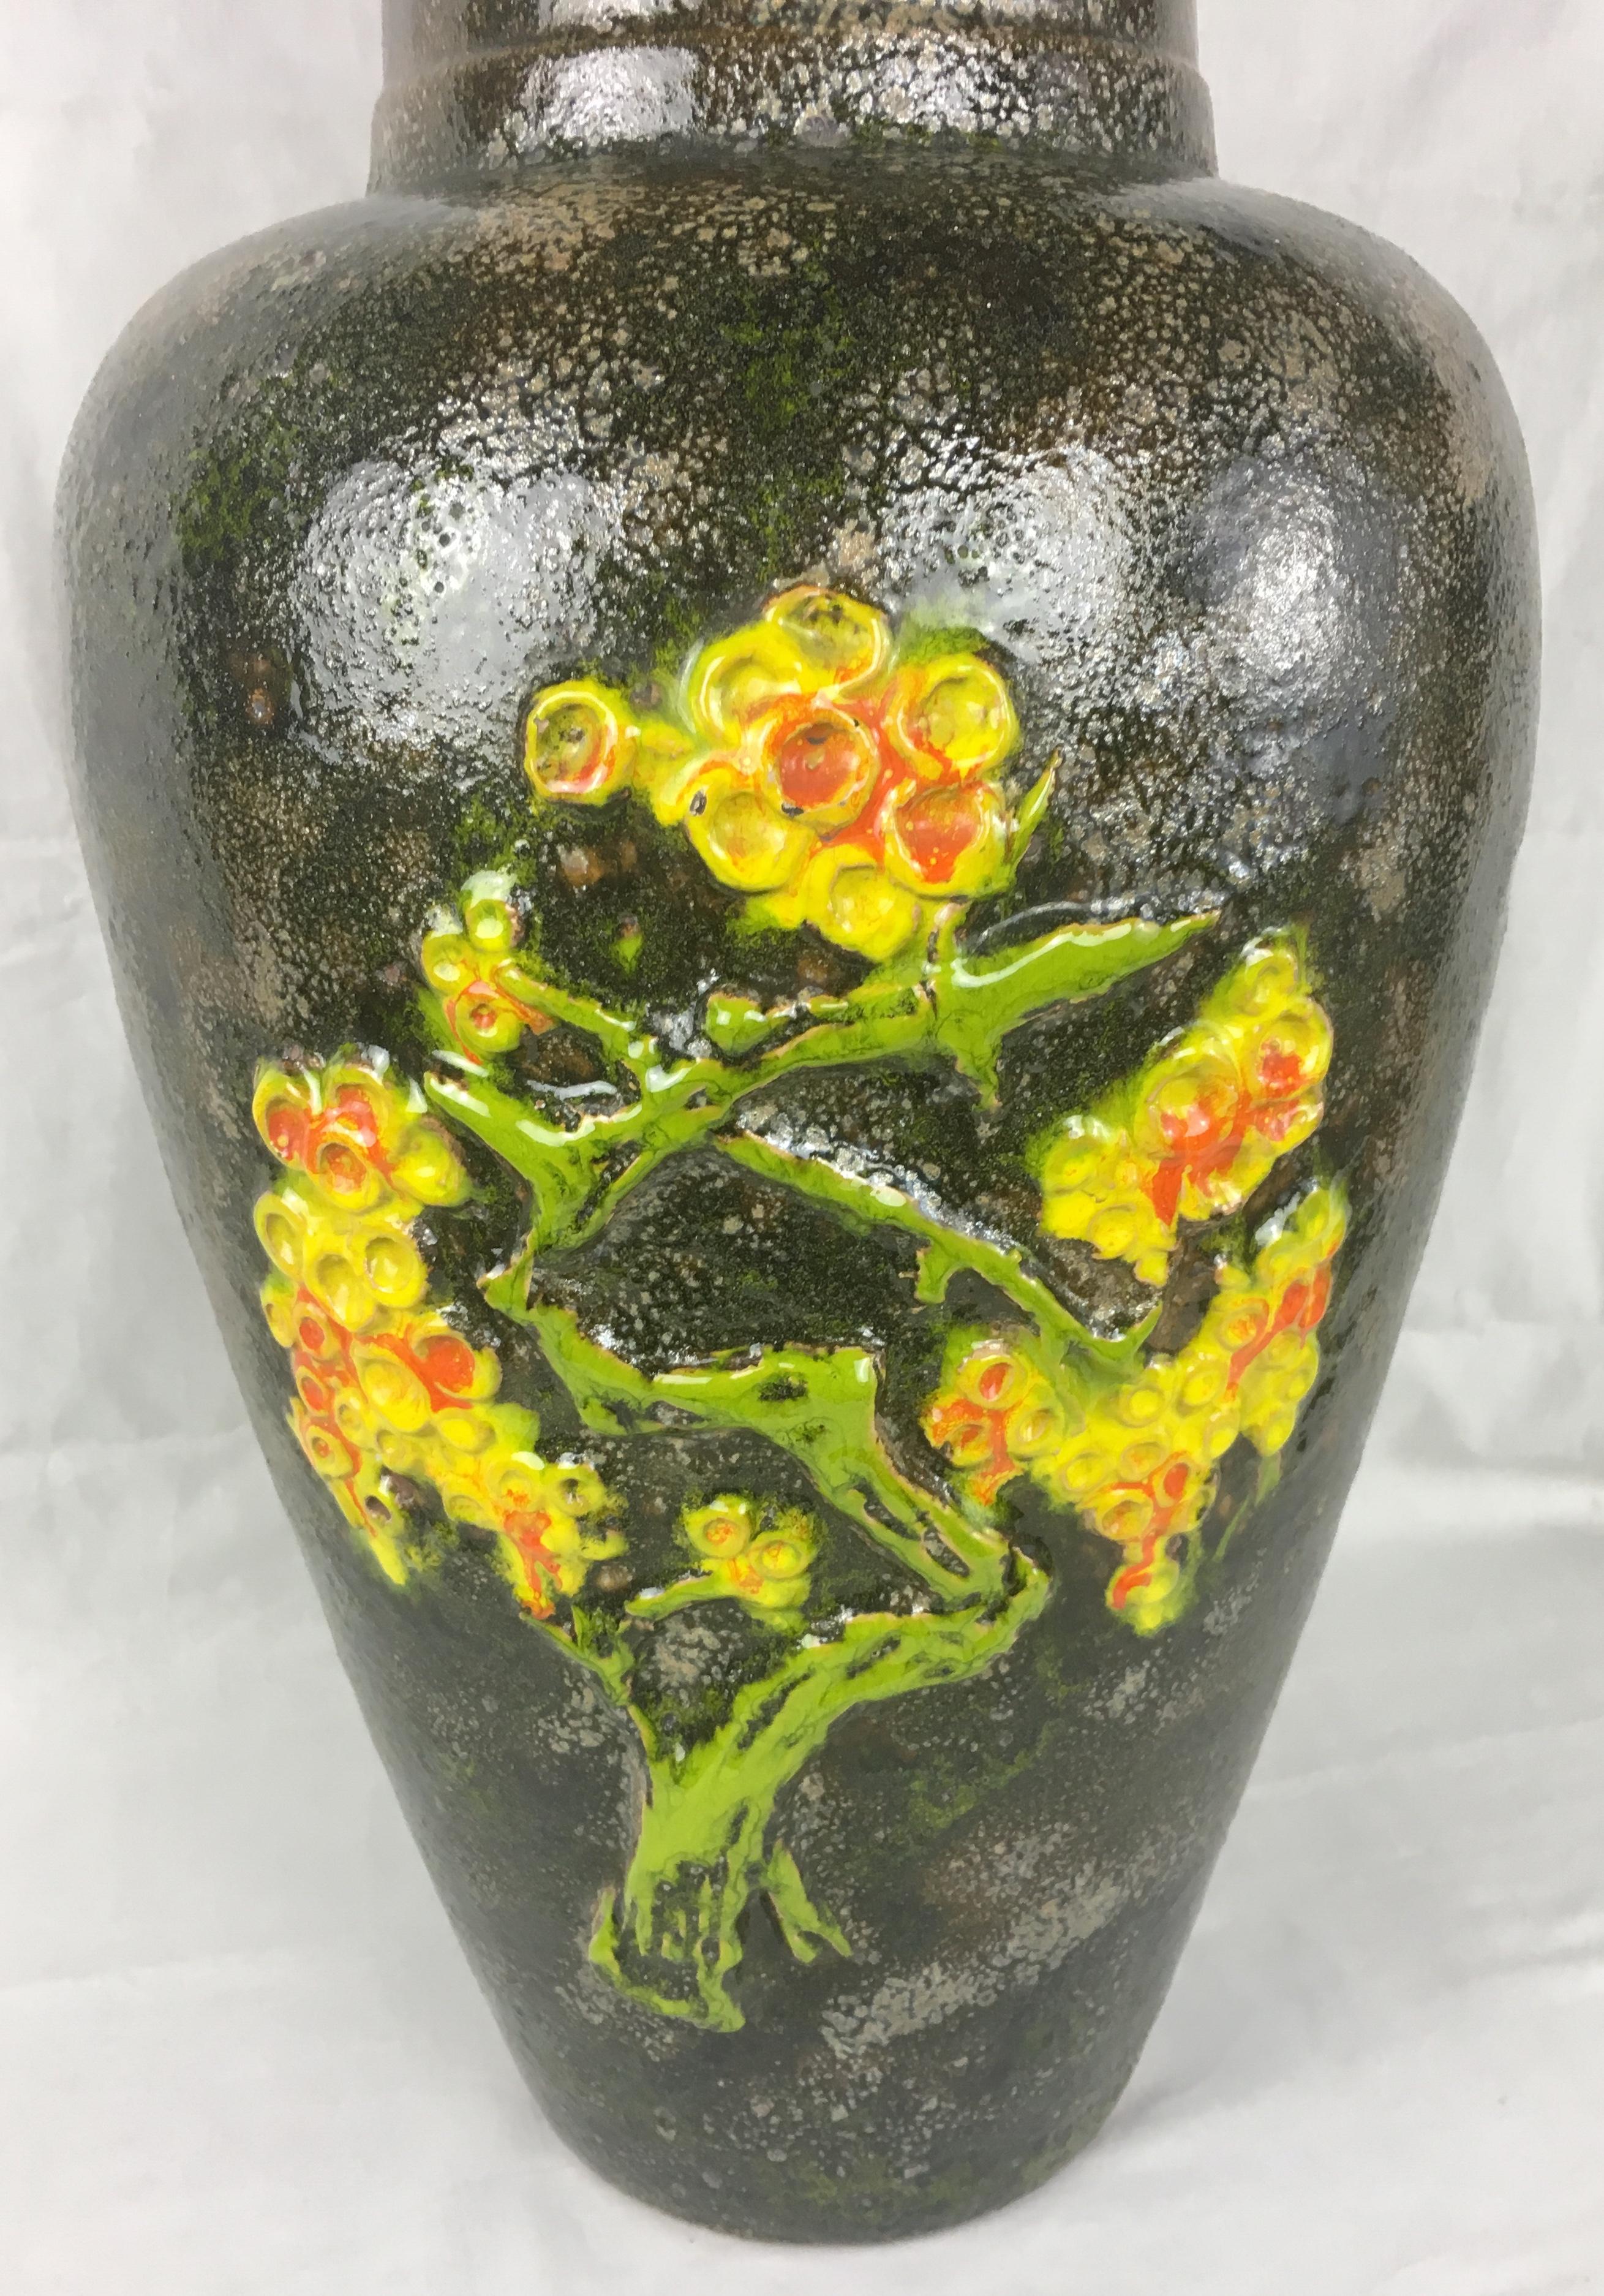 This tall collectable mid- 20th Century West Germany ceramic floor vase was produced circa 1965 by the renowned producer of studio pottery, Scheurich Keramik. The vase features lovely black and grey hues with classical 1960s green, orange and yellow